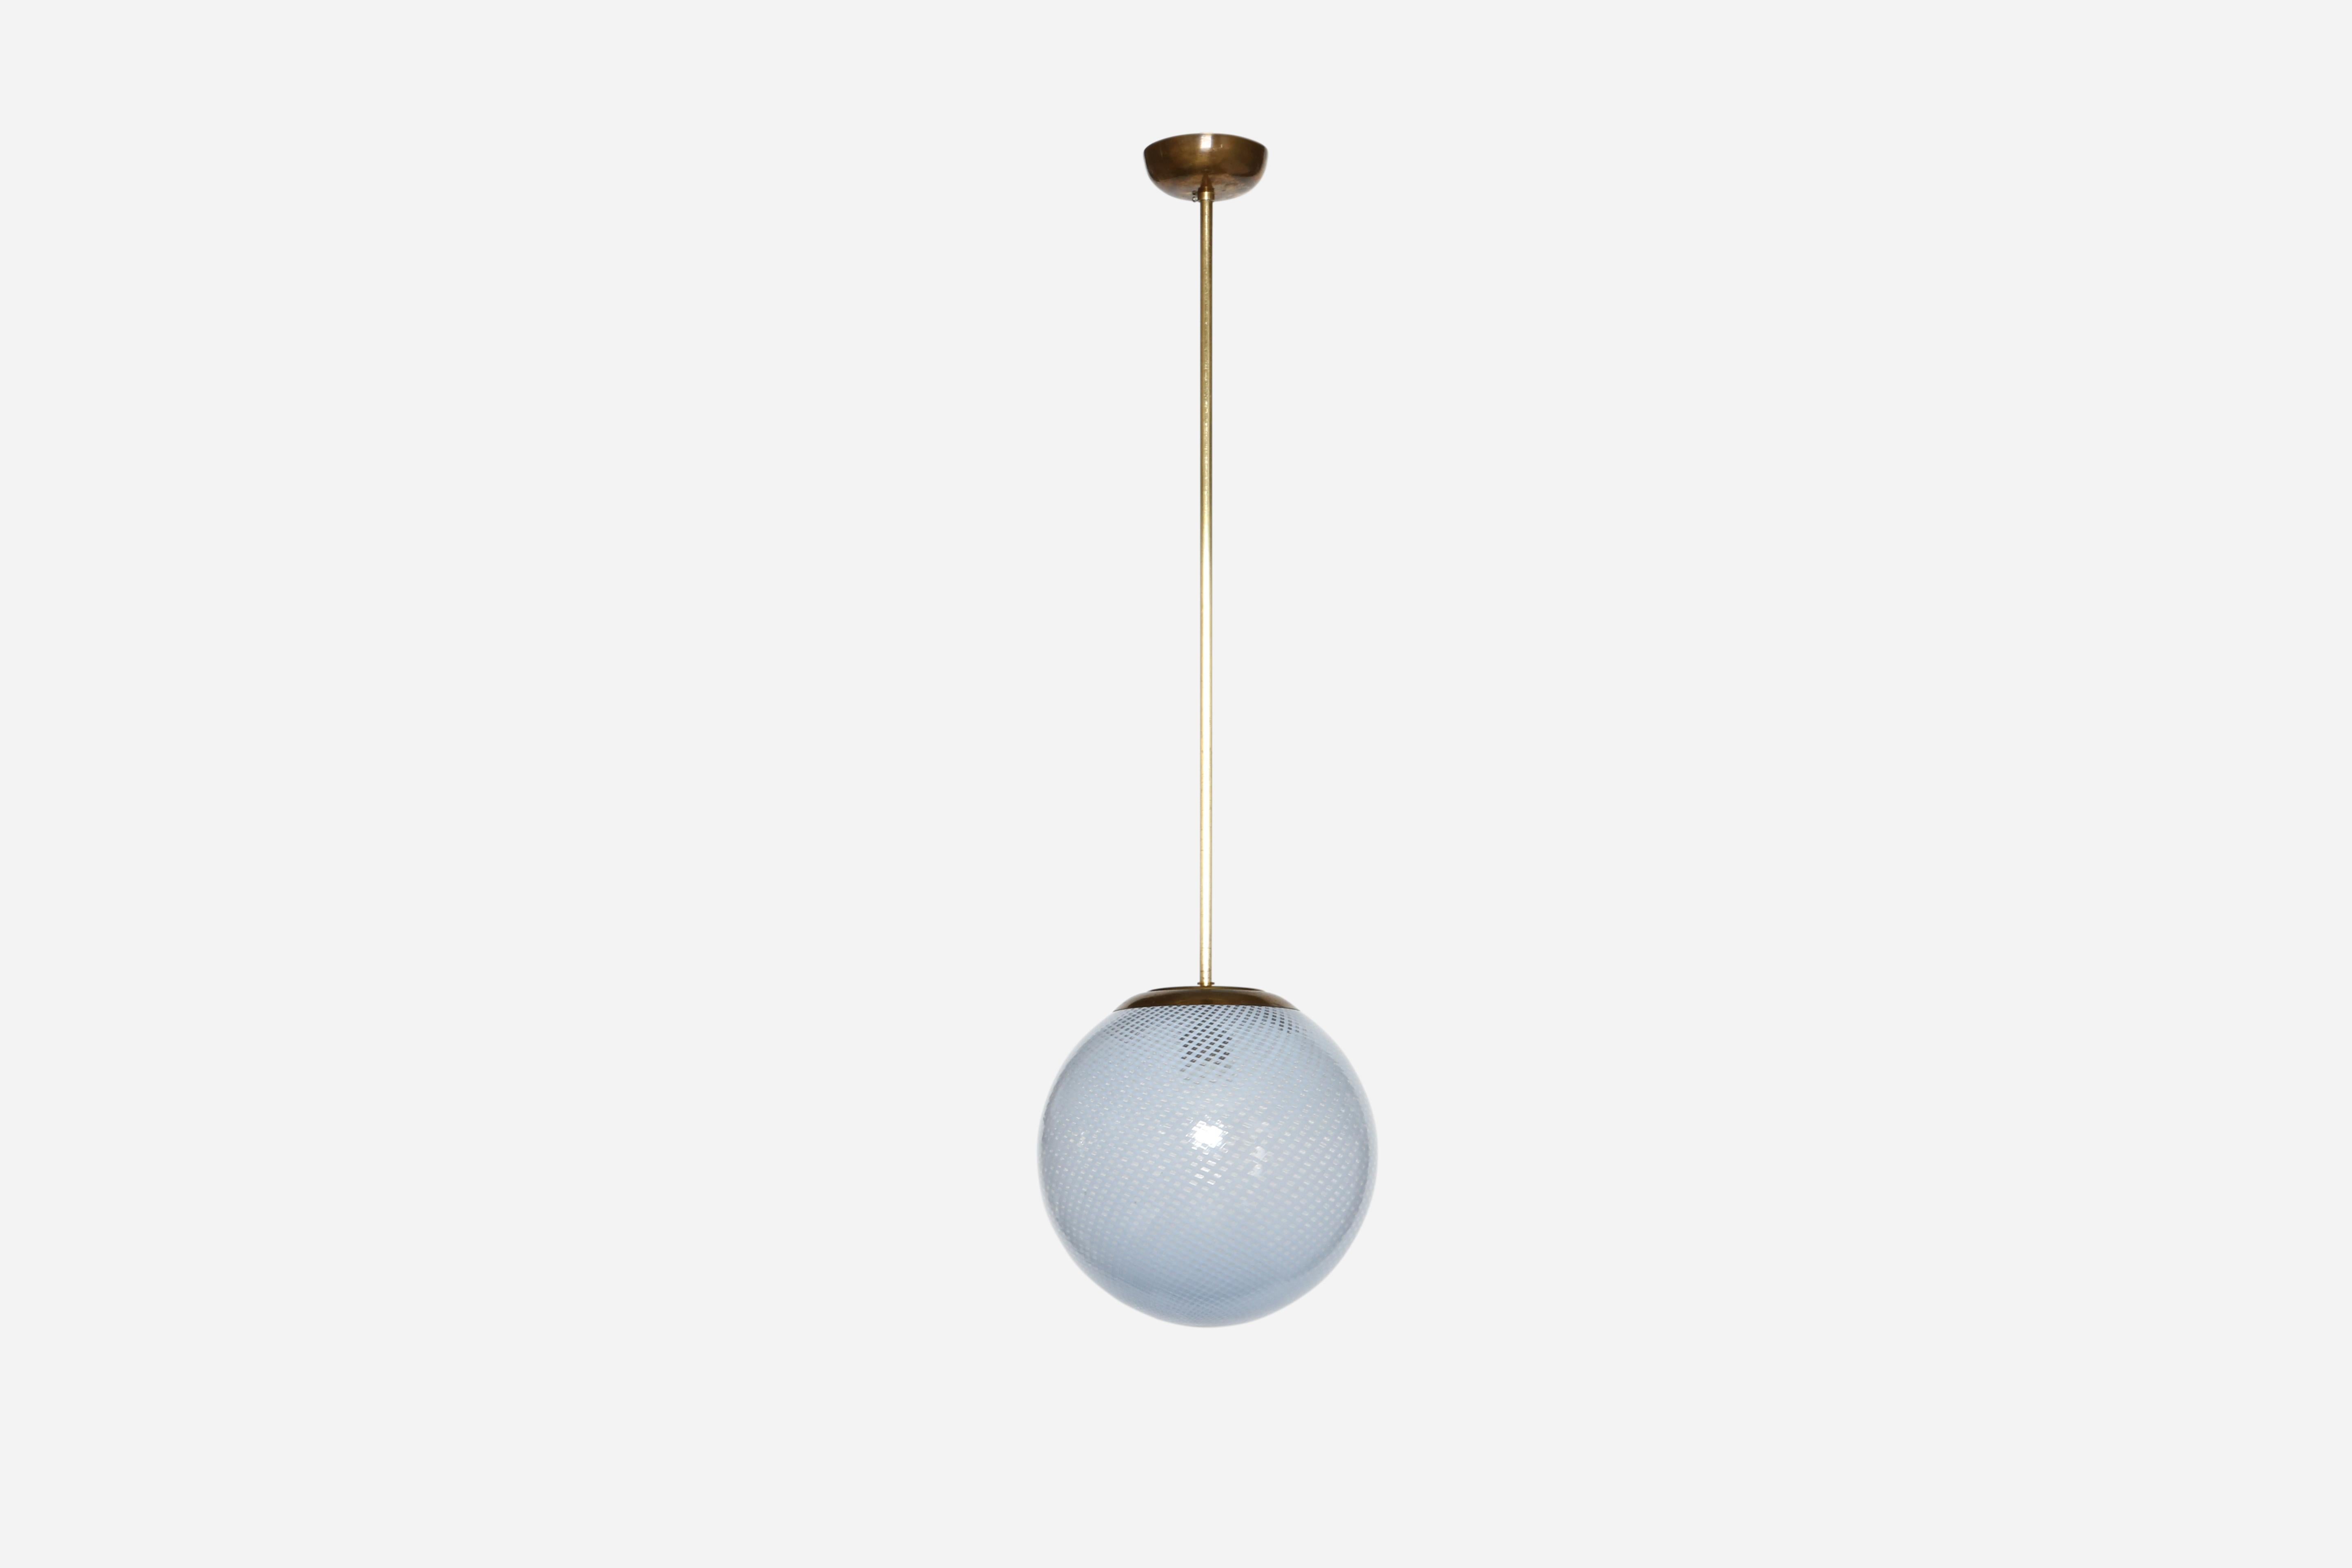 Carlo Scarpa for Venini ceiling light
Model 5258
Italy 1940s
Handblown glass, brass
Exquisite glass making technique and rare color.
Overall drop adjustable, can be made shorter.
Takes one medium base bulb.
Complimentary US rewiring upon